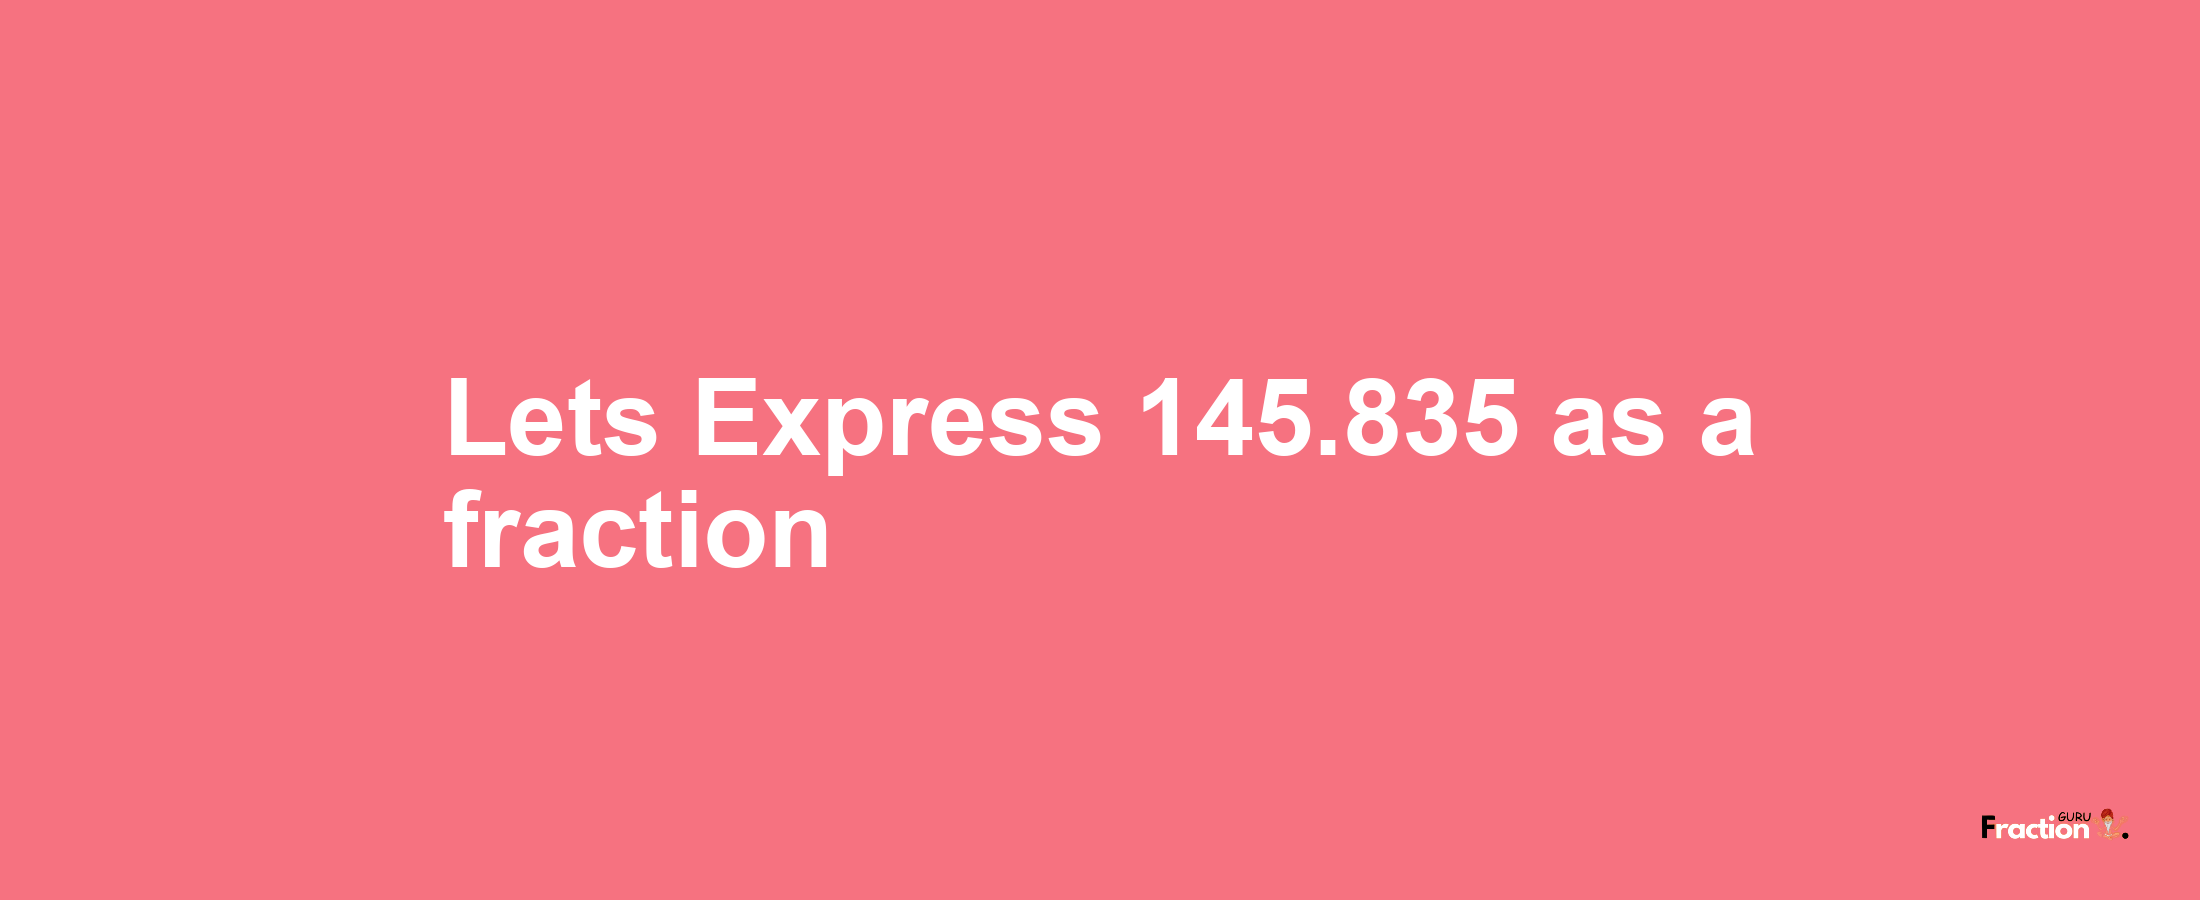 Lets Express 145.835 as afraction